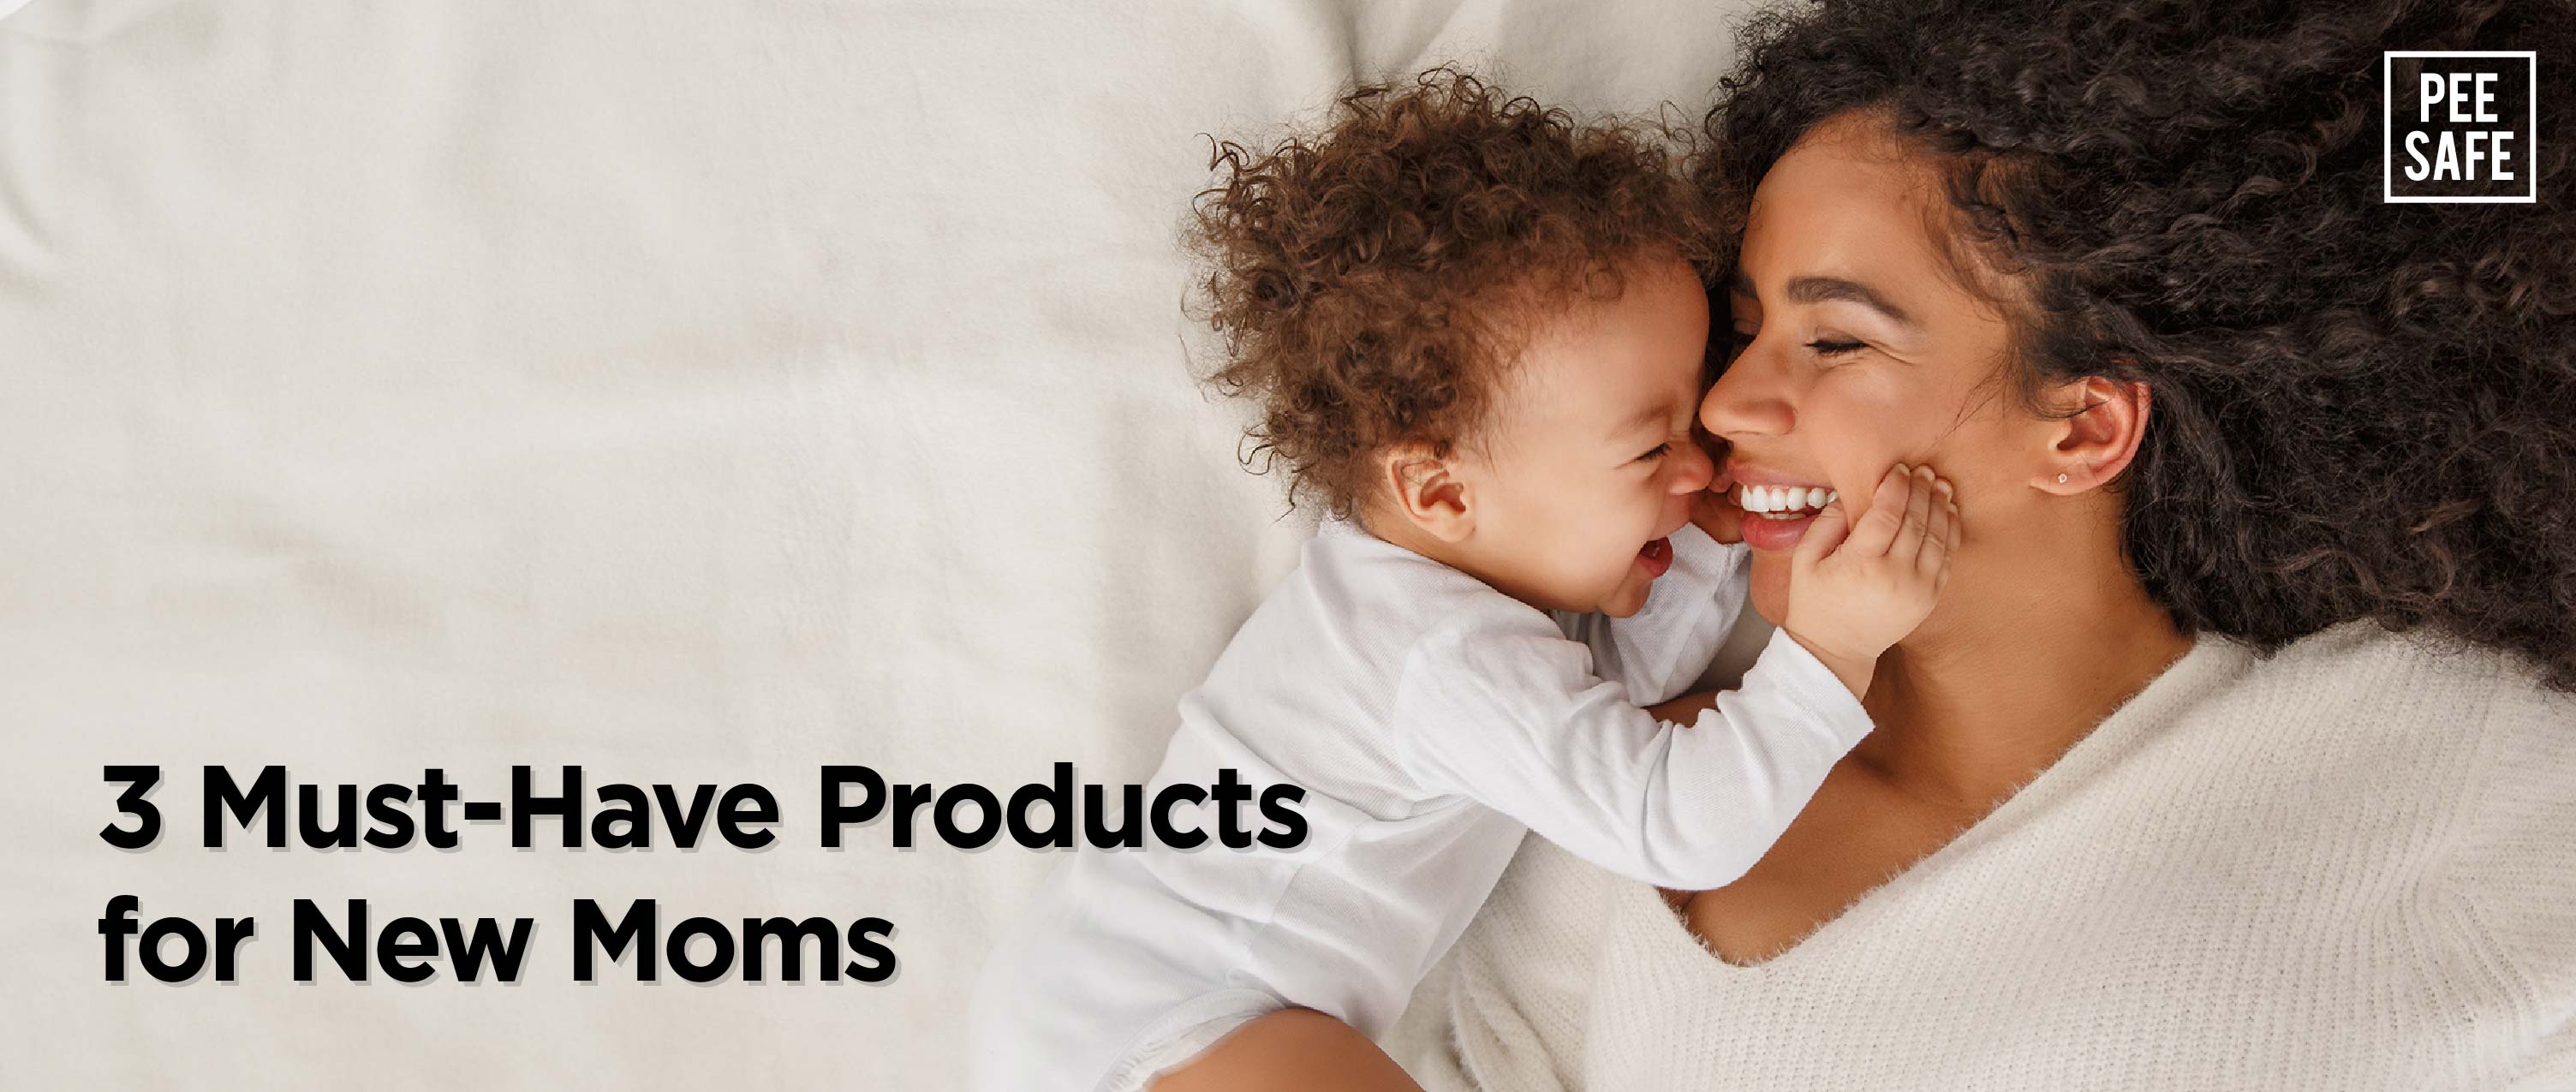 3 Must-Have Products for New Moms